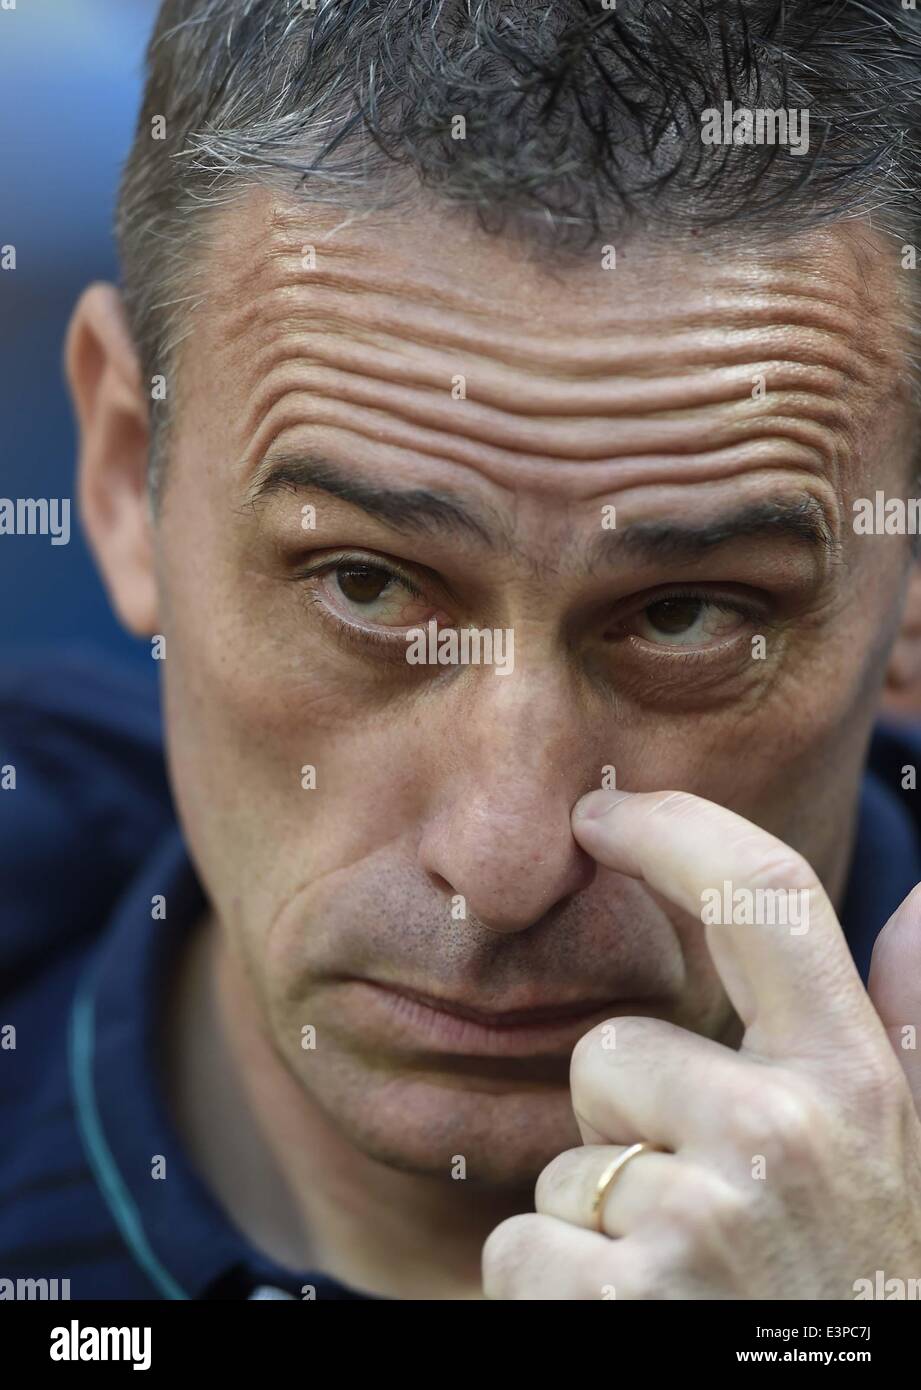 Brasilia, Brazil. 26th June, 2014. Portugal's head coach Paulo Bento looks on during a Group G match between Portugal and Ghana of 2014 FIFA World Cup at the Estadio Nacional Stadium in Brasilia, Brazil, June 26, 2014. Credit:  Qi Heng/Xinhua/Alamy Live News Stock Photo